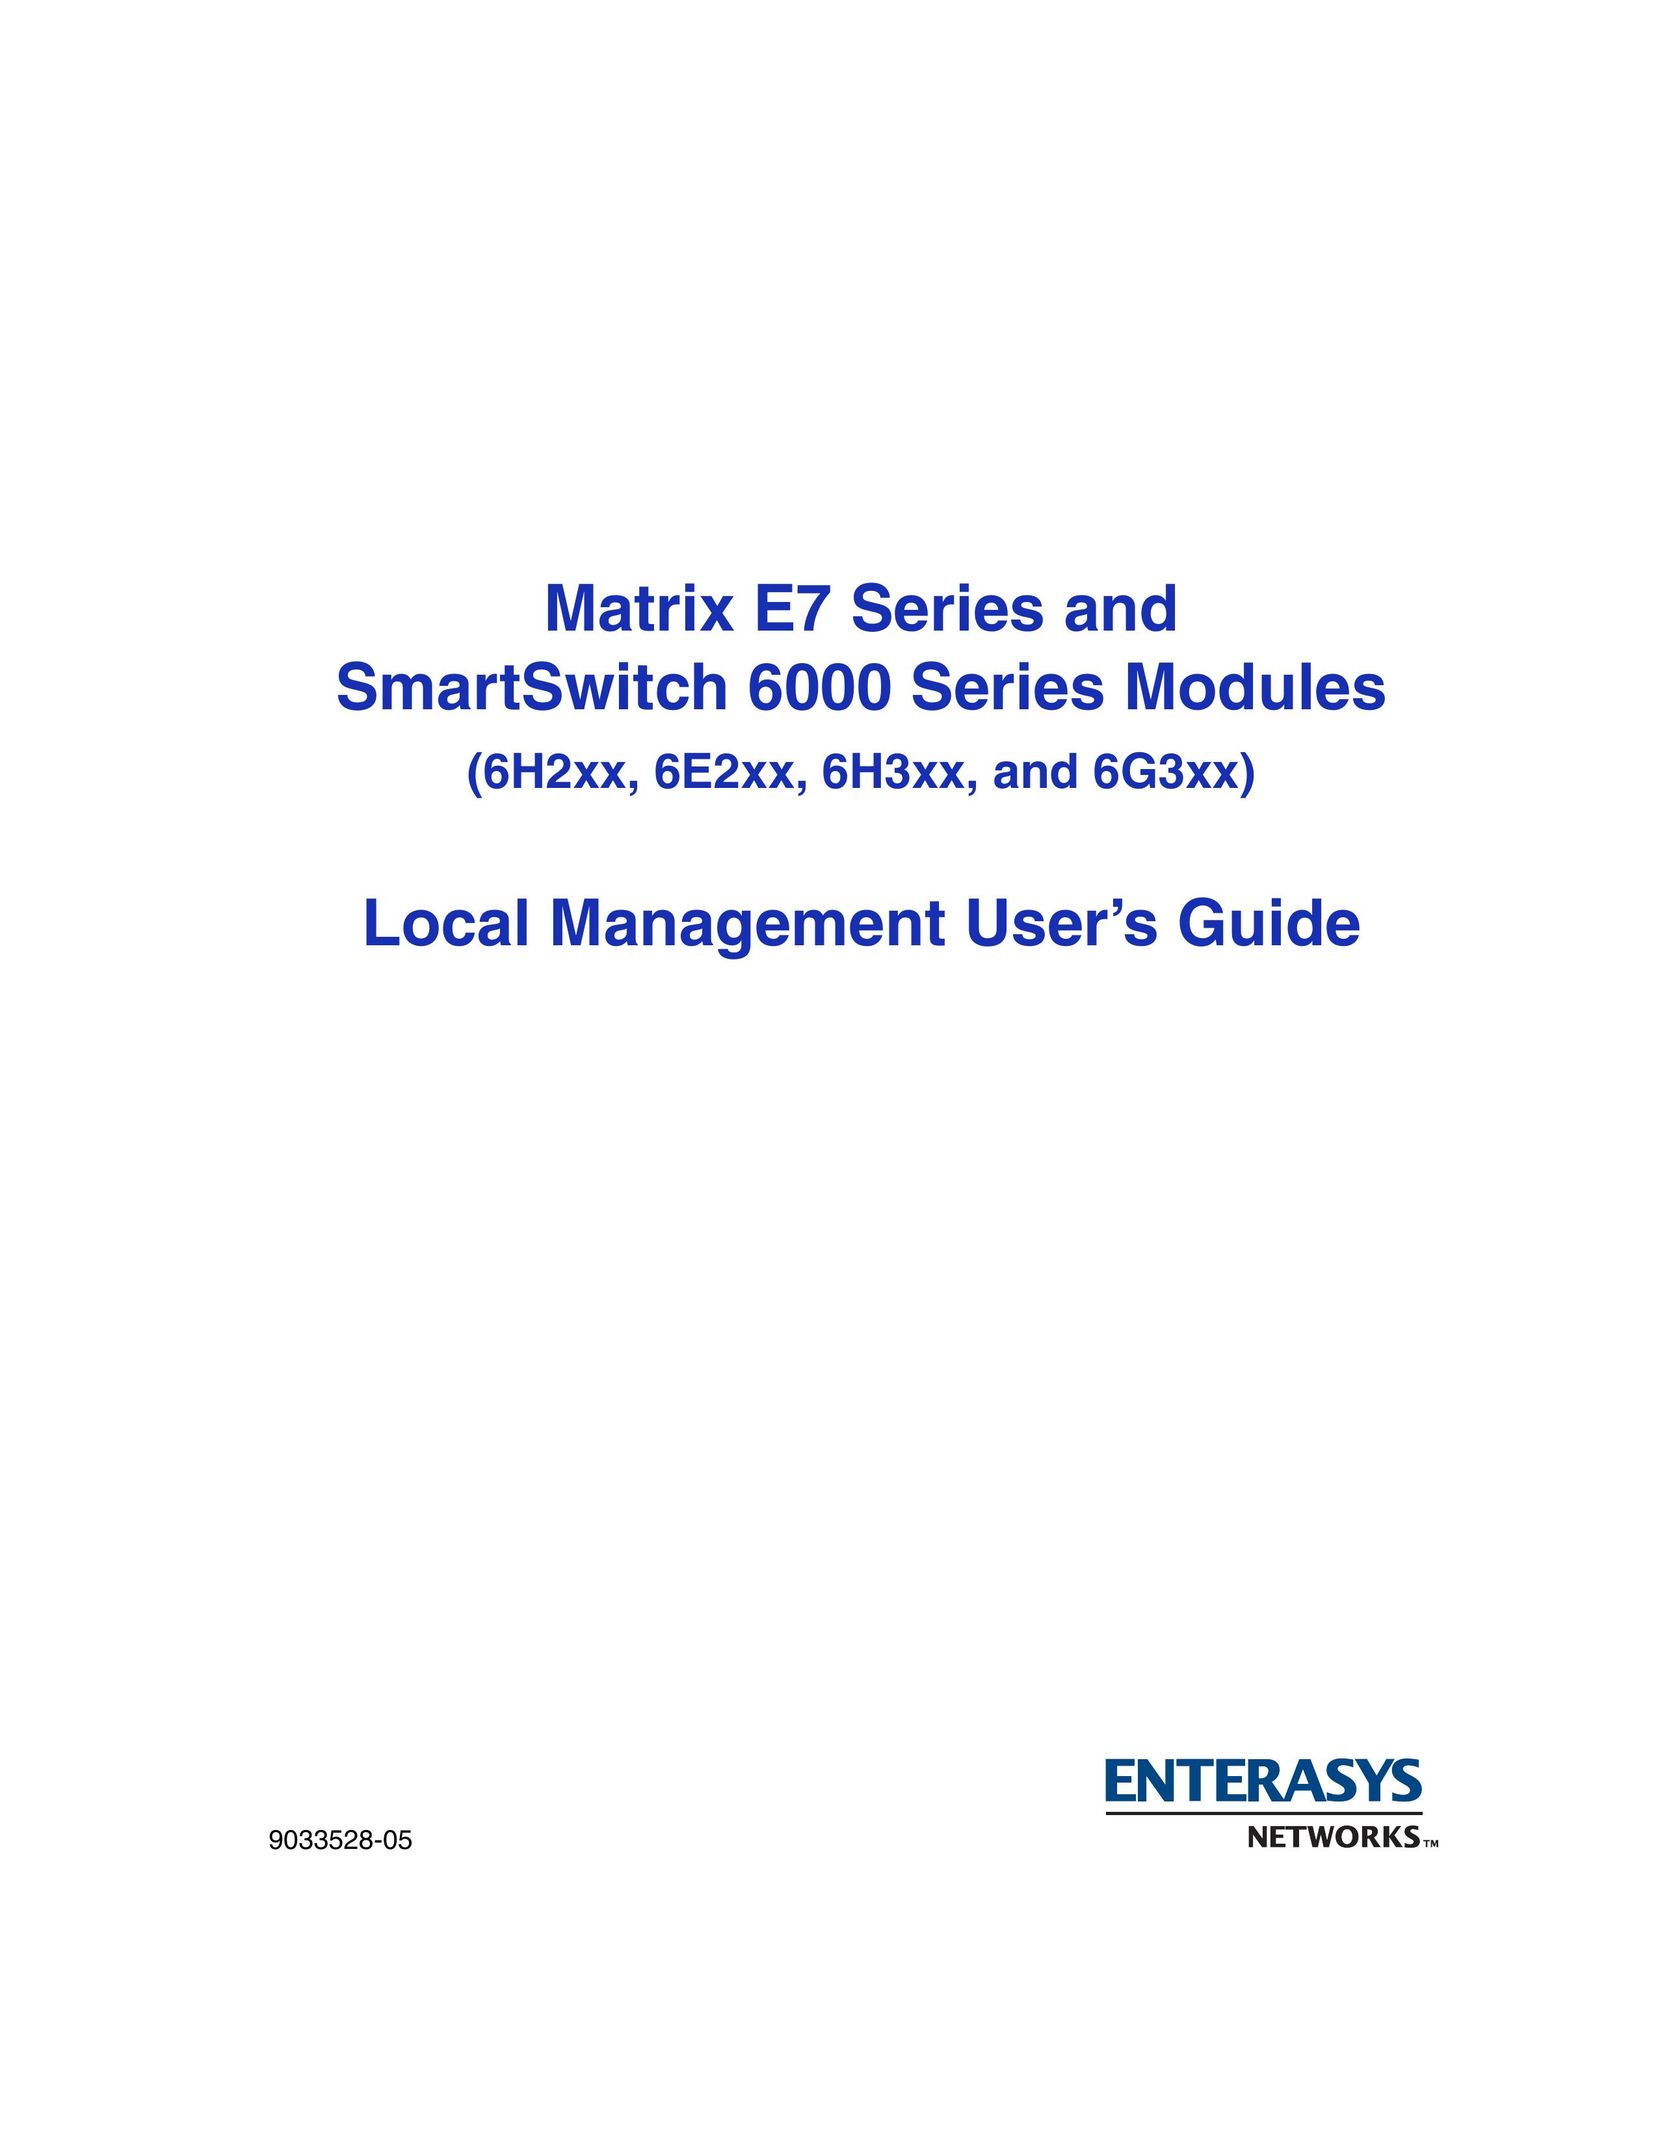 Enterasys Networks 6H3xx Switch User Manual